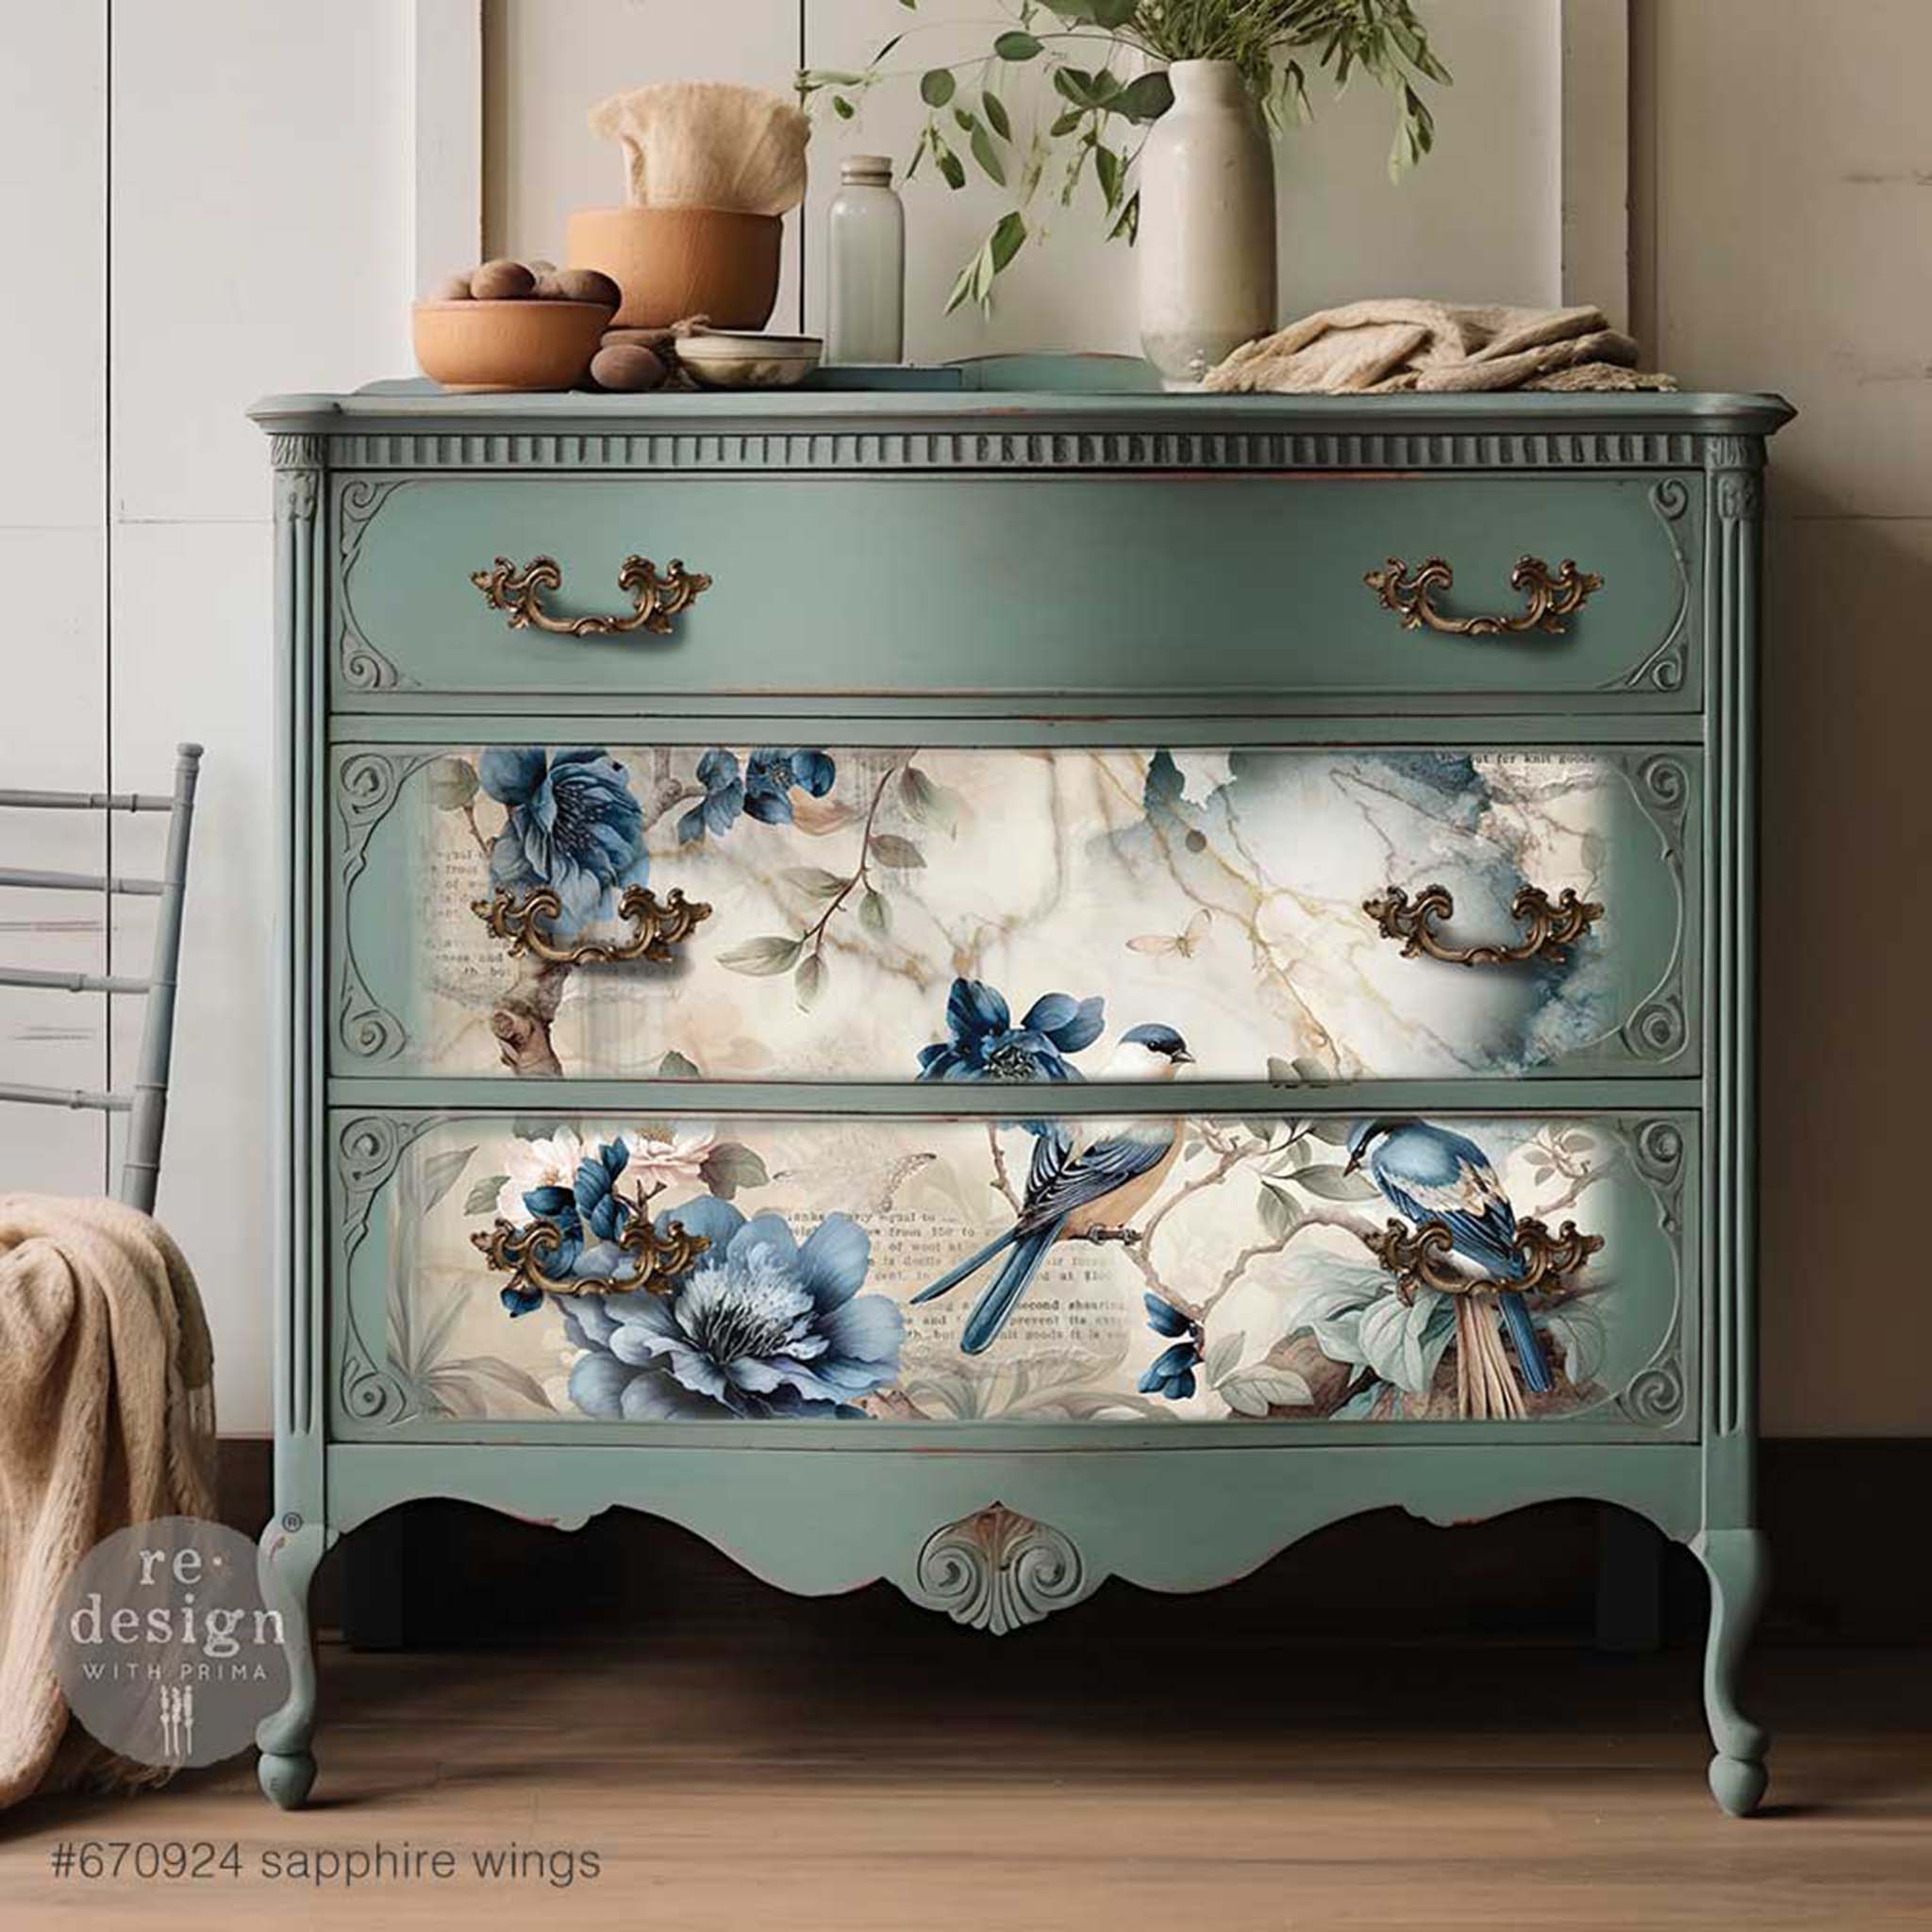 A vintage 3-drawer dresser is painted a muted teal blue and features ReDesign with Prima's Sapphire Wings tissue paper on the bottom 2 drawers.